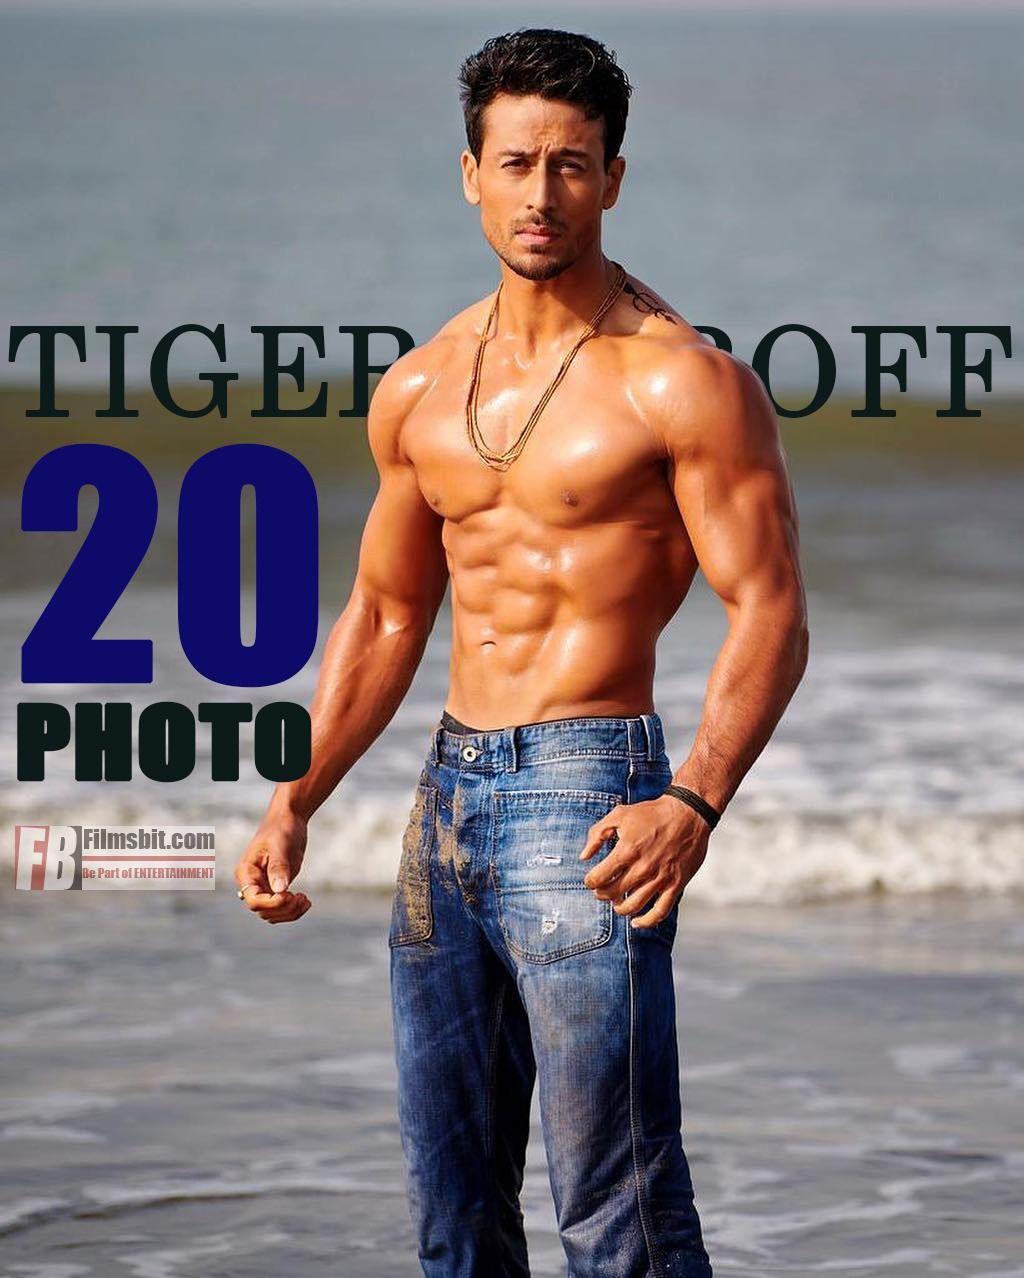 Tiger Shroff Body Phone Wallpapers - Wallpaper Cave